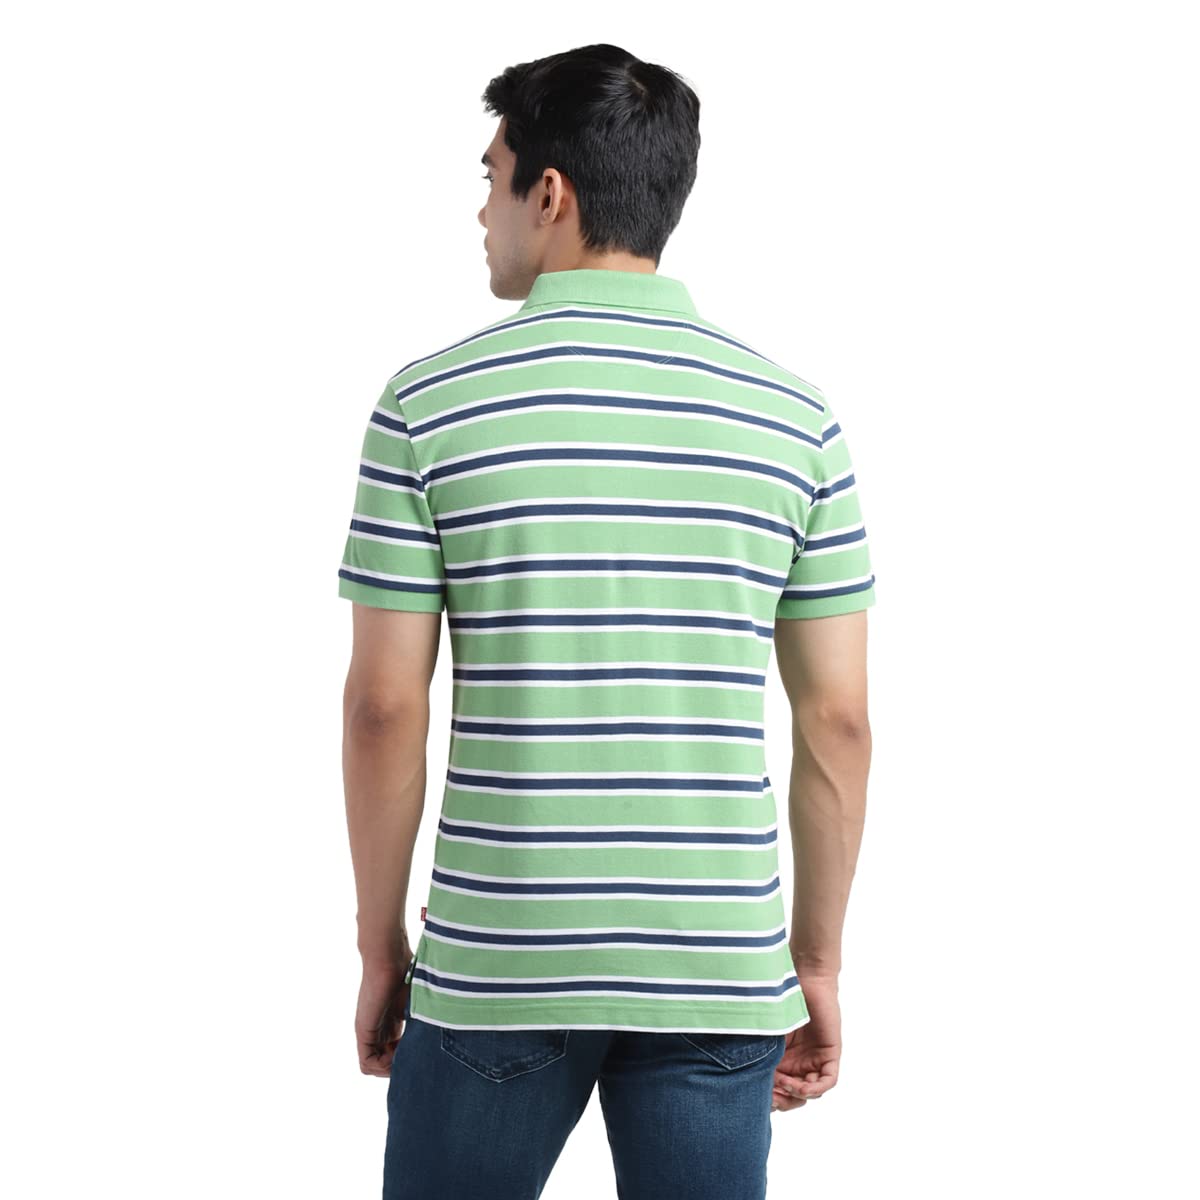 Levi's Men's Fitted Polo Shirt (17474-0267_Peppermint Green/Blue M)